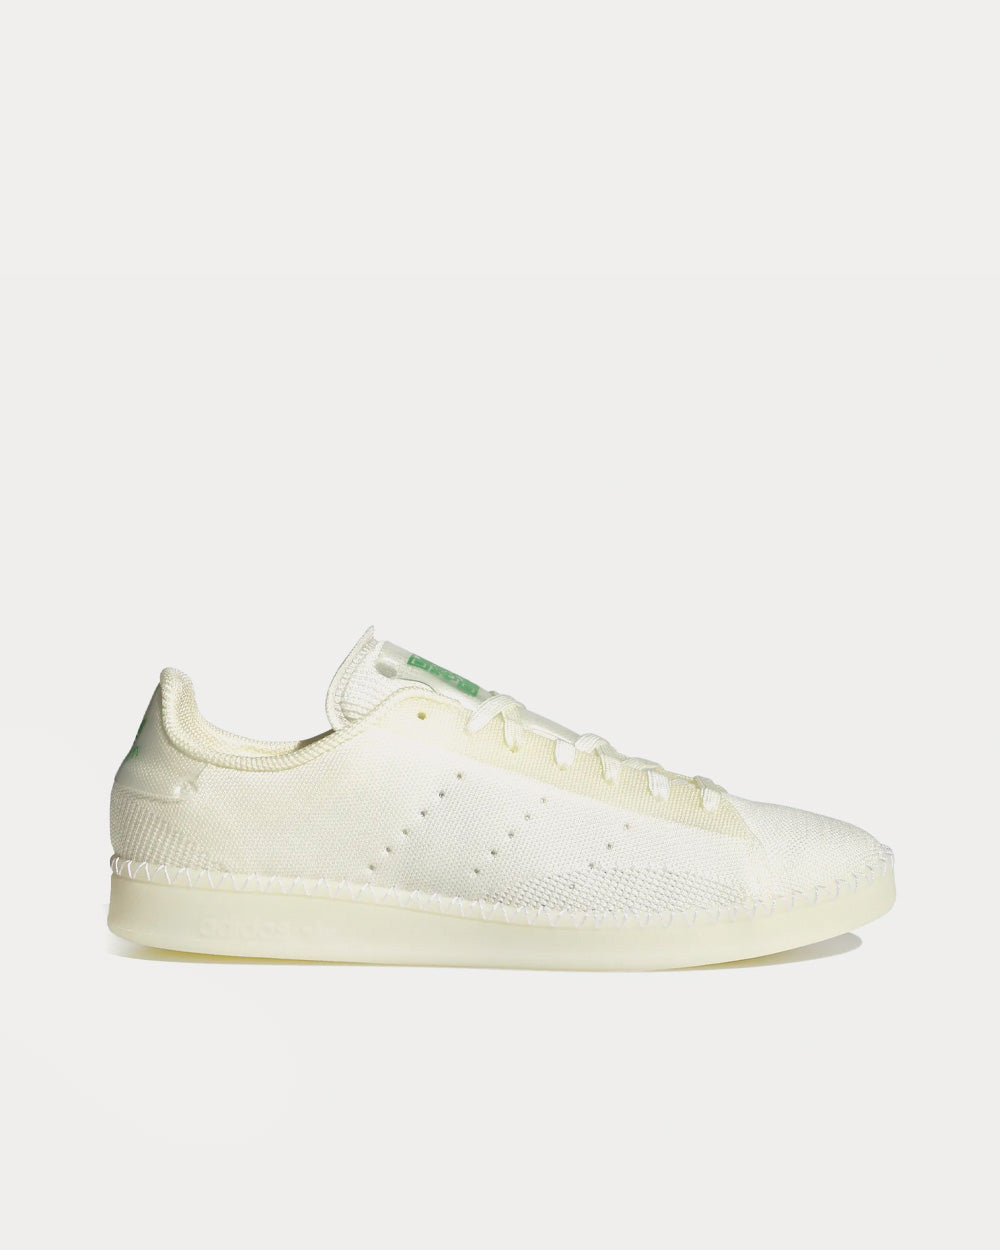 Adidas - Stan Smith MTBR Non Dyed / Non Dyed / Green Low Top Sneakers